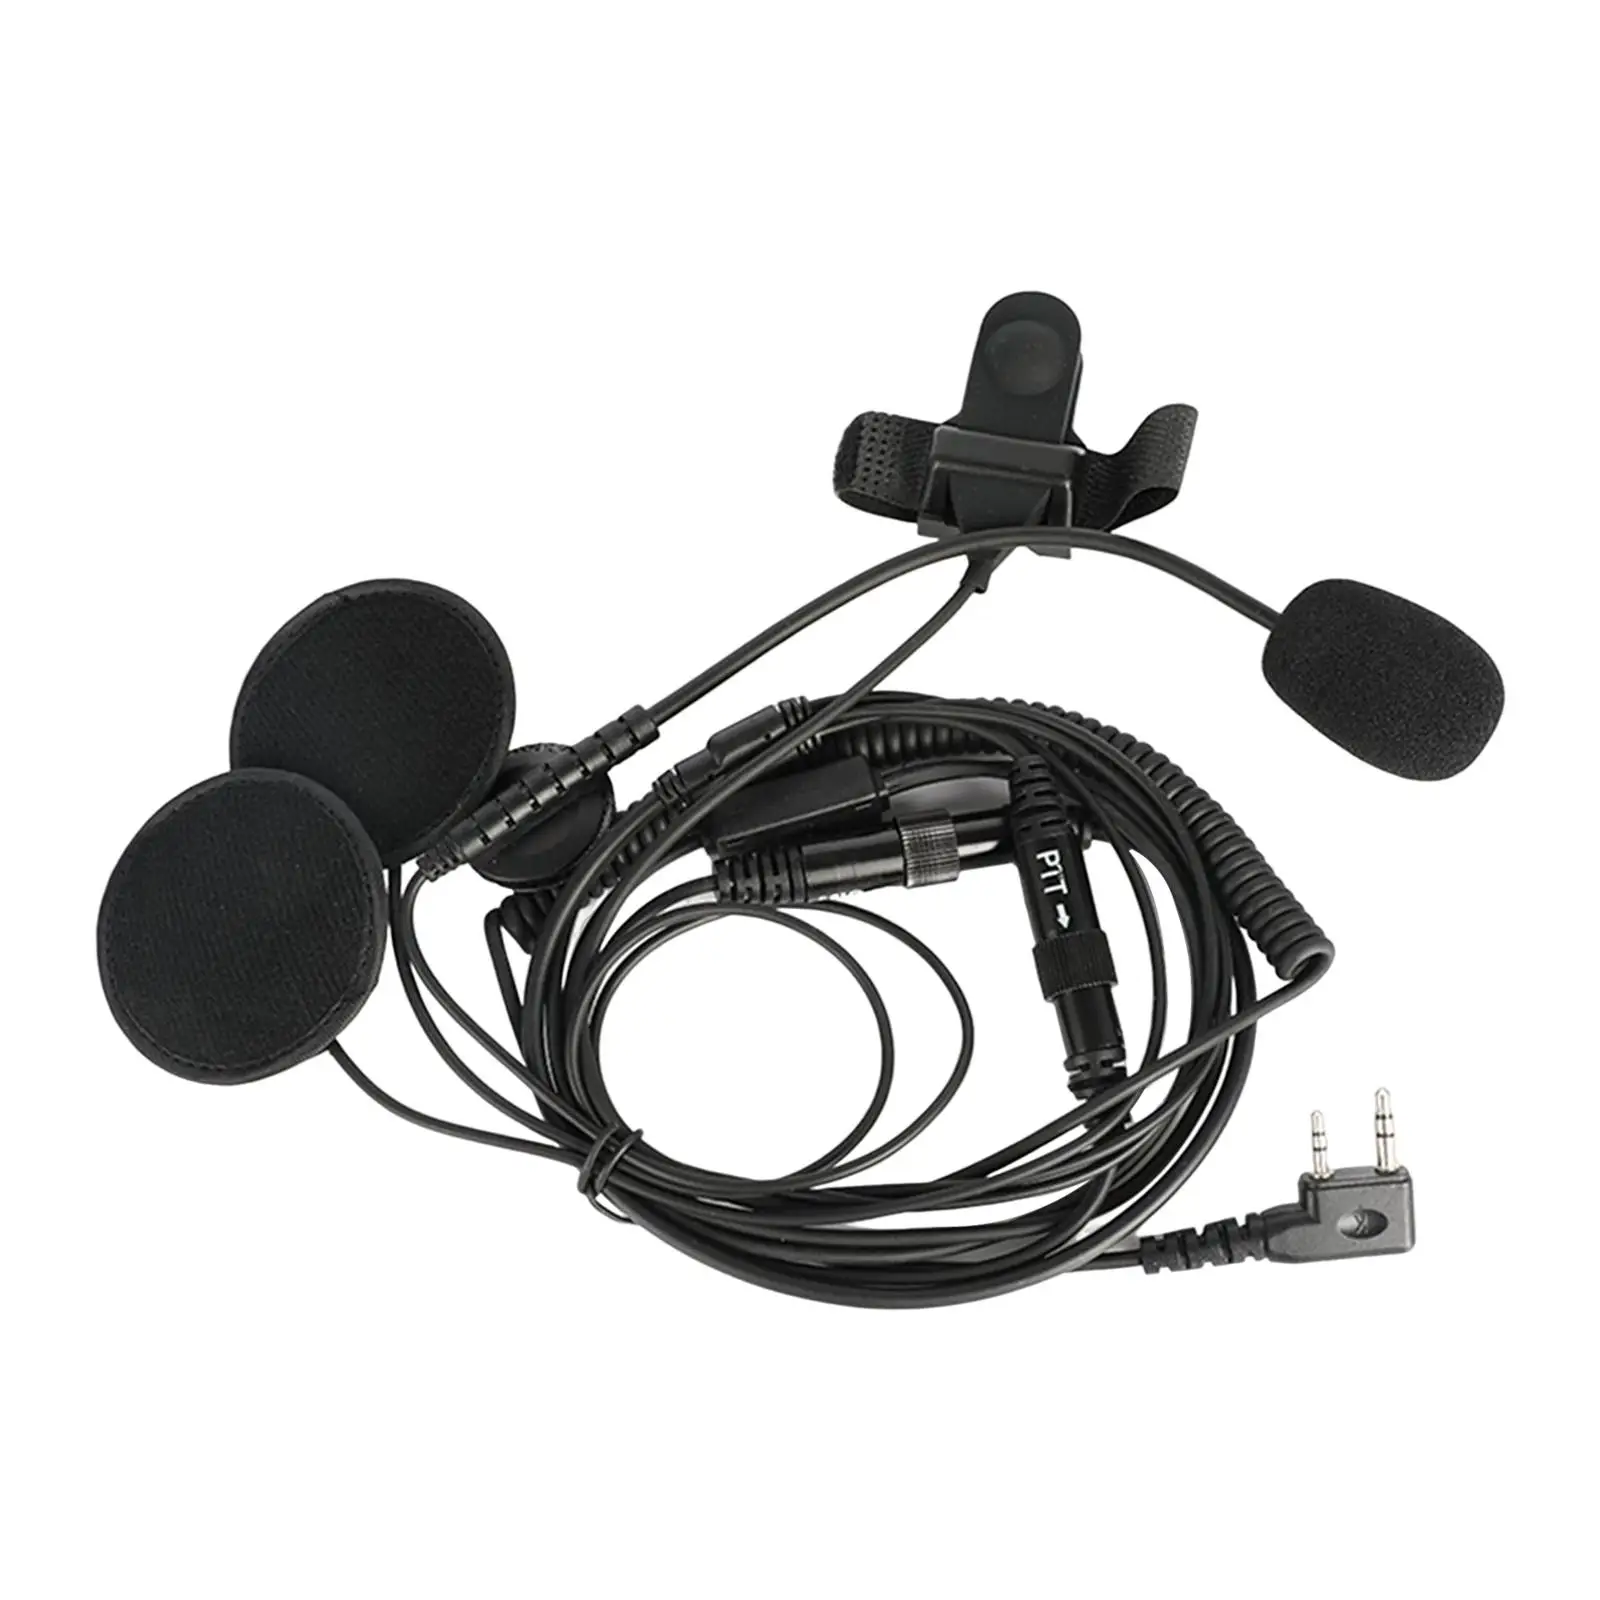 Two Headset Earpiece Cycling Headphones Outdoor with PMic